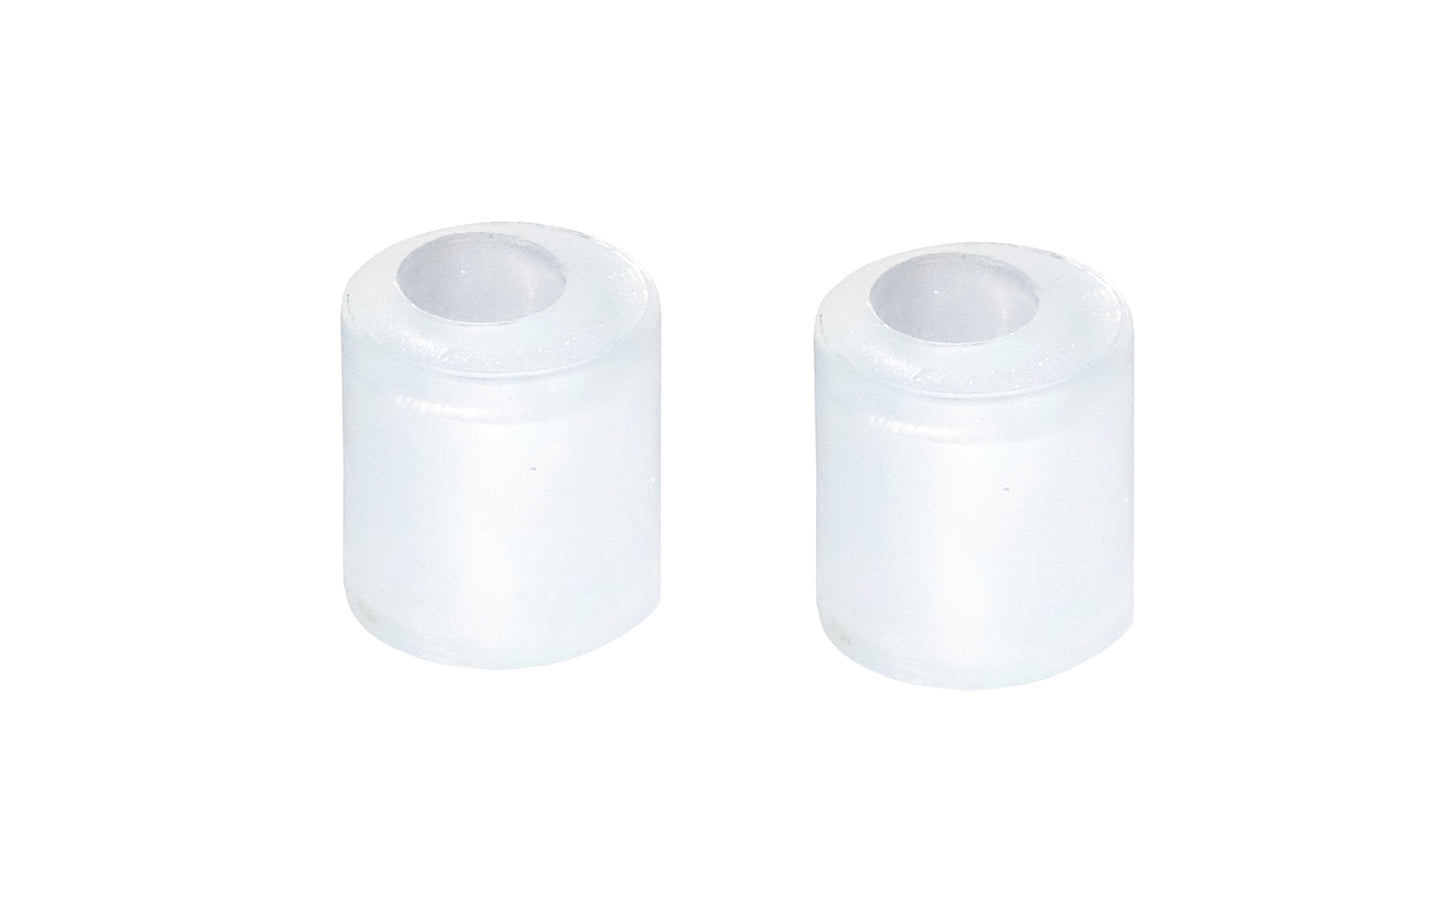 The FastCap Euro Door Tall Stops for Inset Doors ~ Shuts inset doors nice & evenly - Rotate stops to adjust until the faces are flush. Clear & 5/8" tall size. Camming action allows for fine adjustment. Model EURO DOOR TALL 10 CL. No screws. 663807028952. 10 Pack